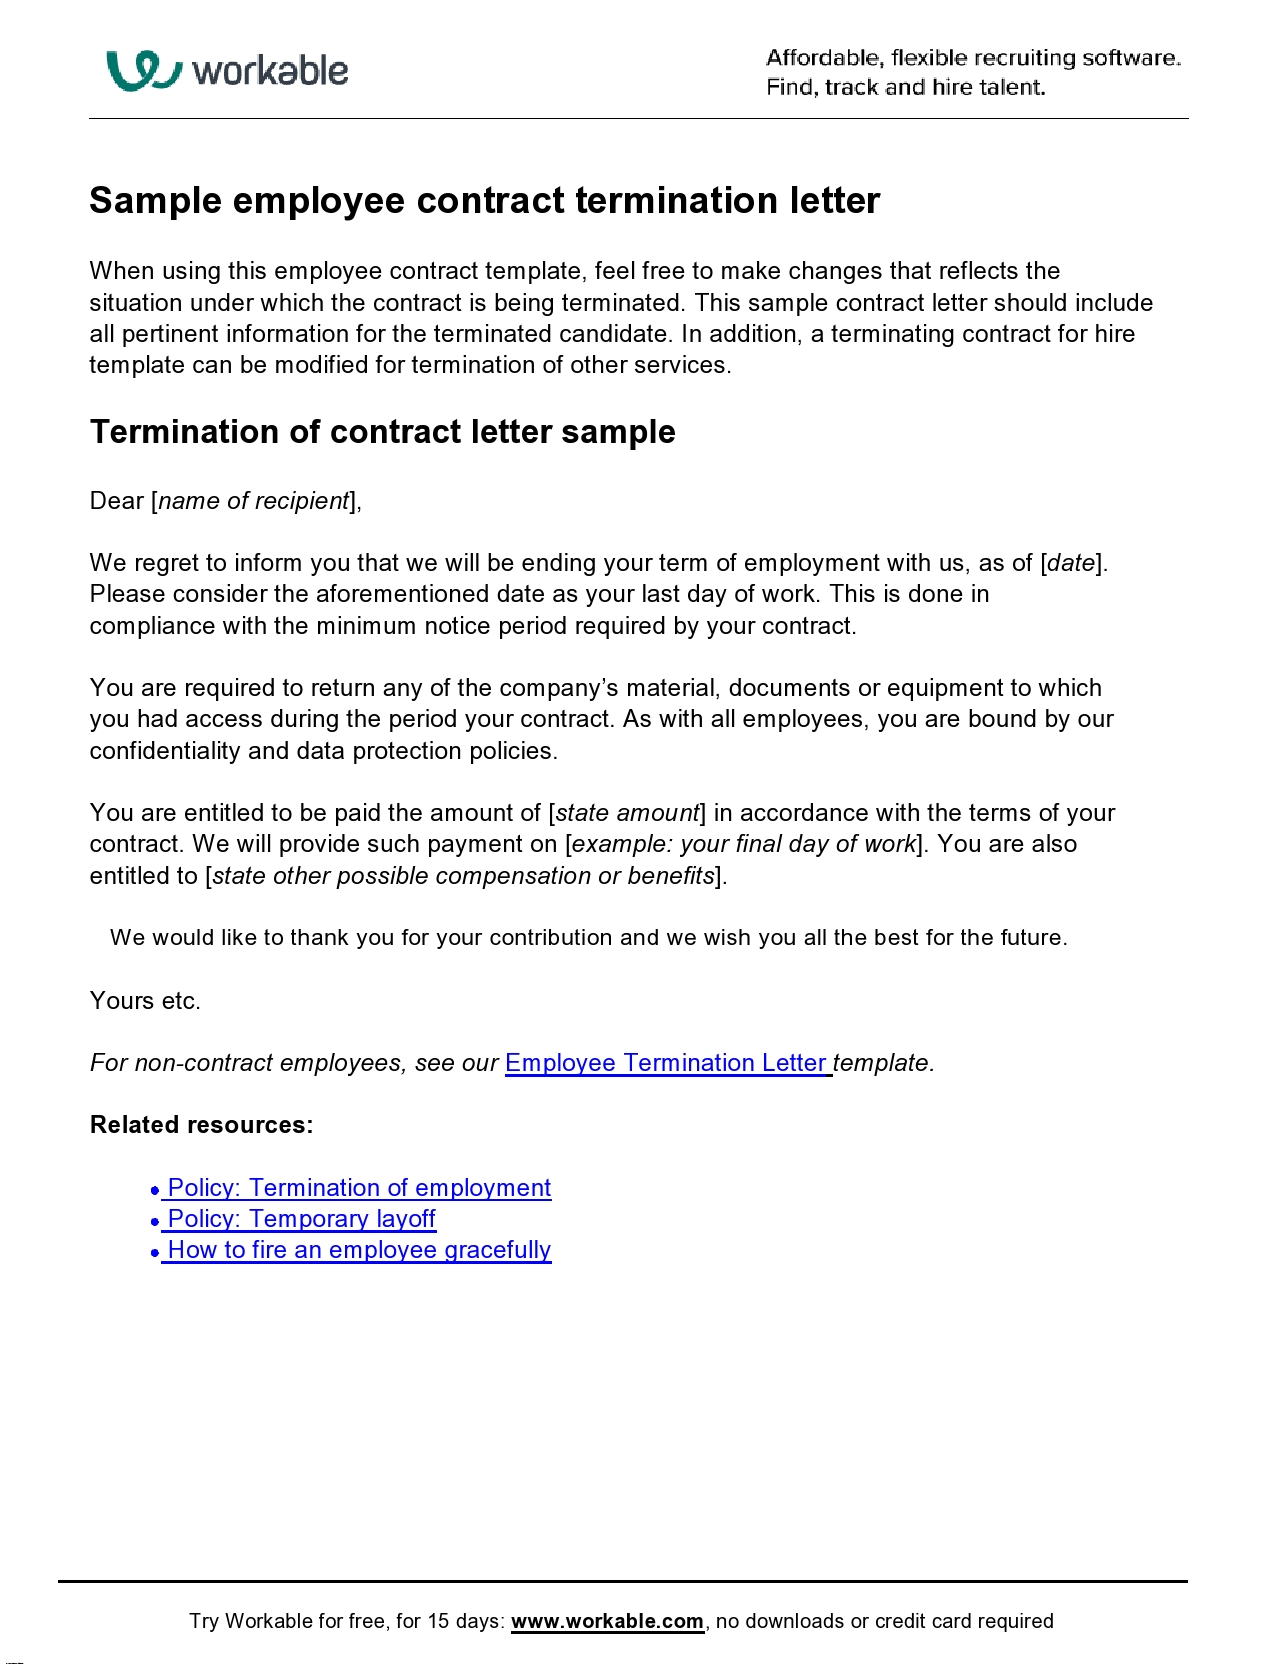 Free contract termination letter 21